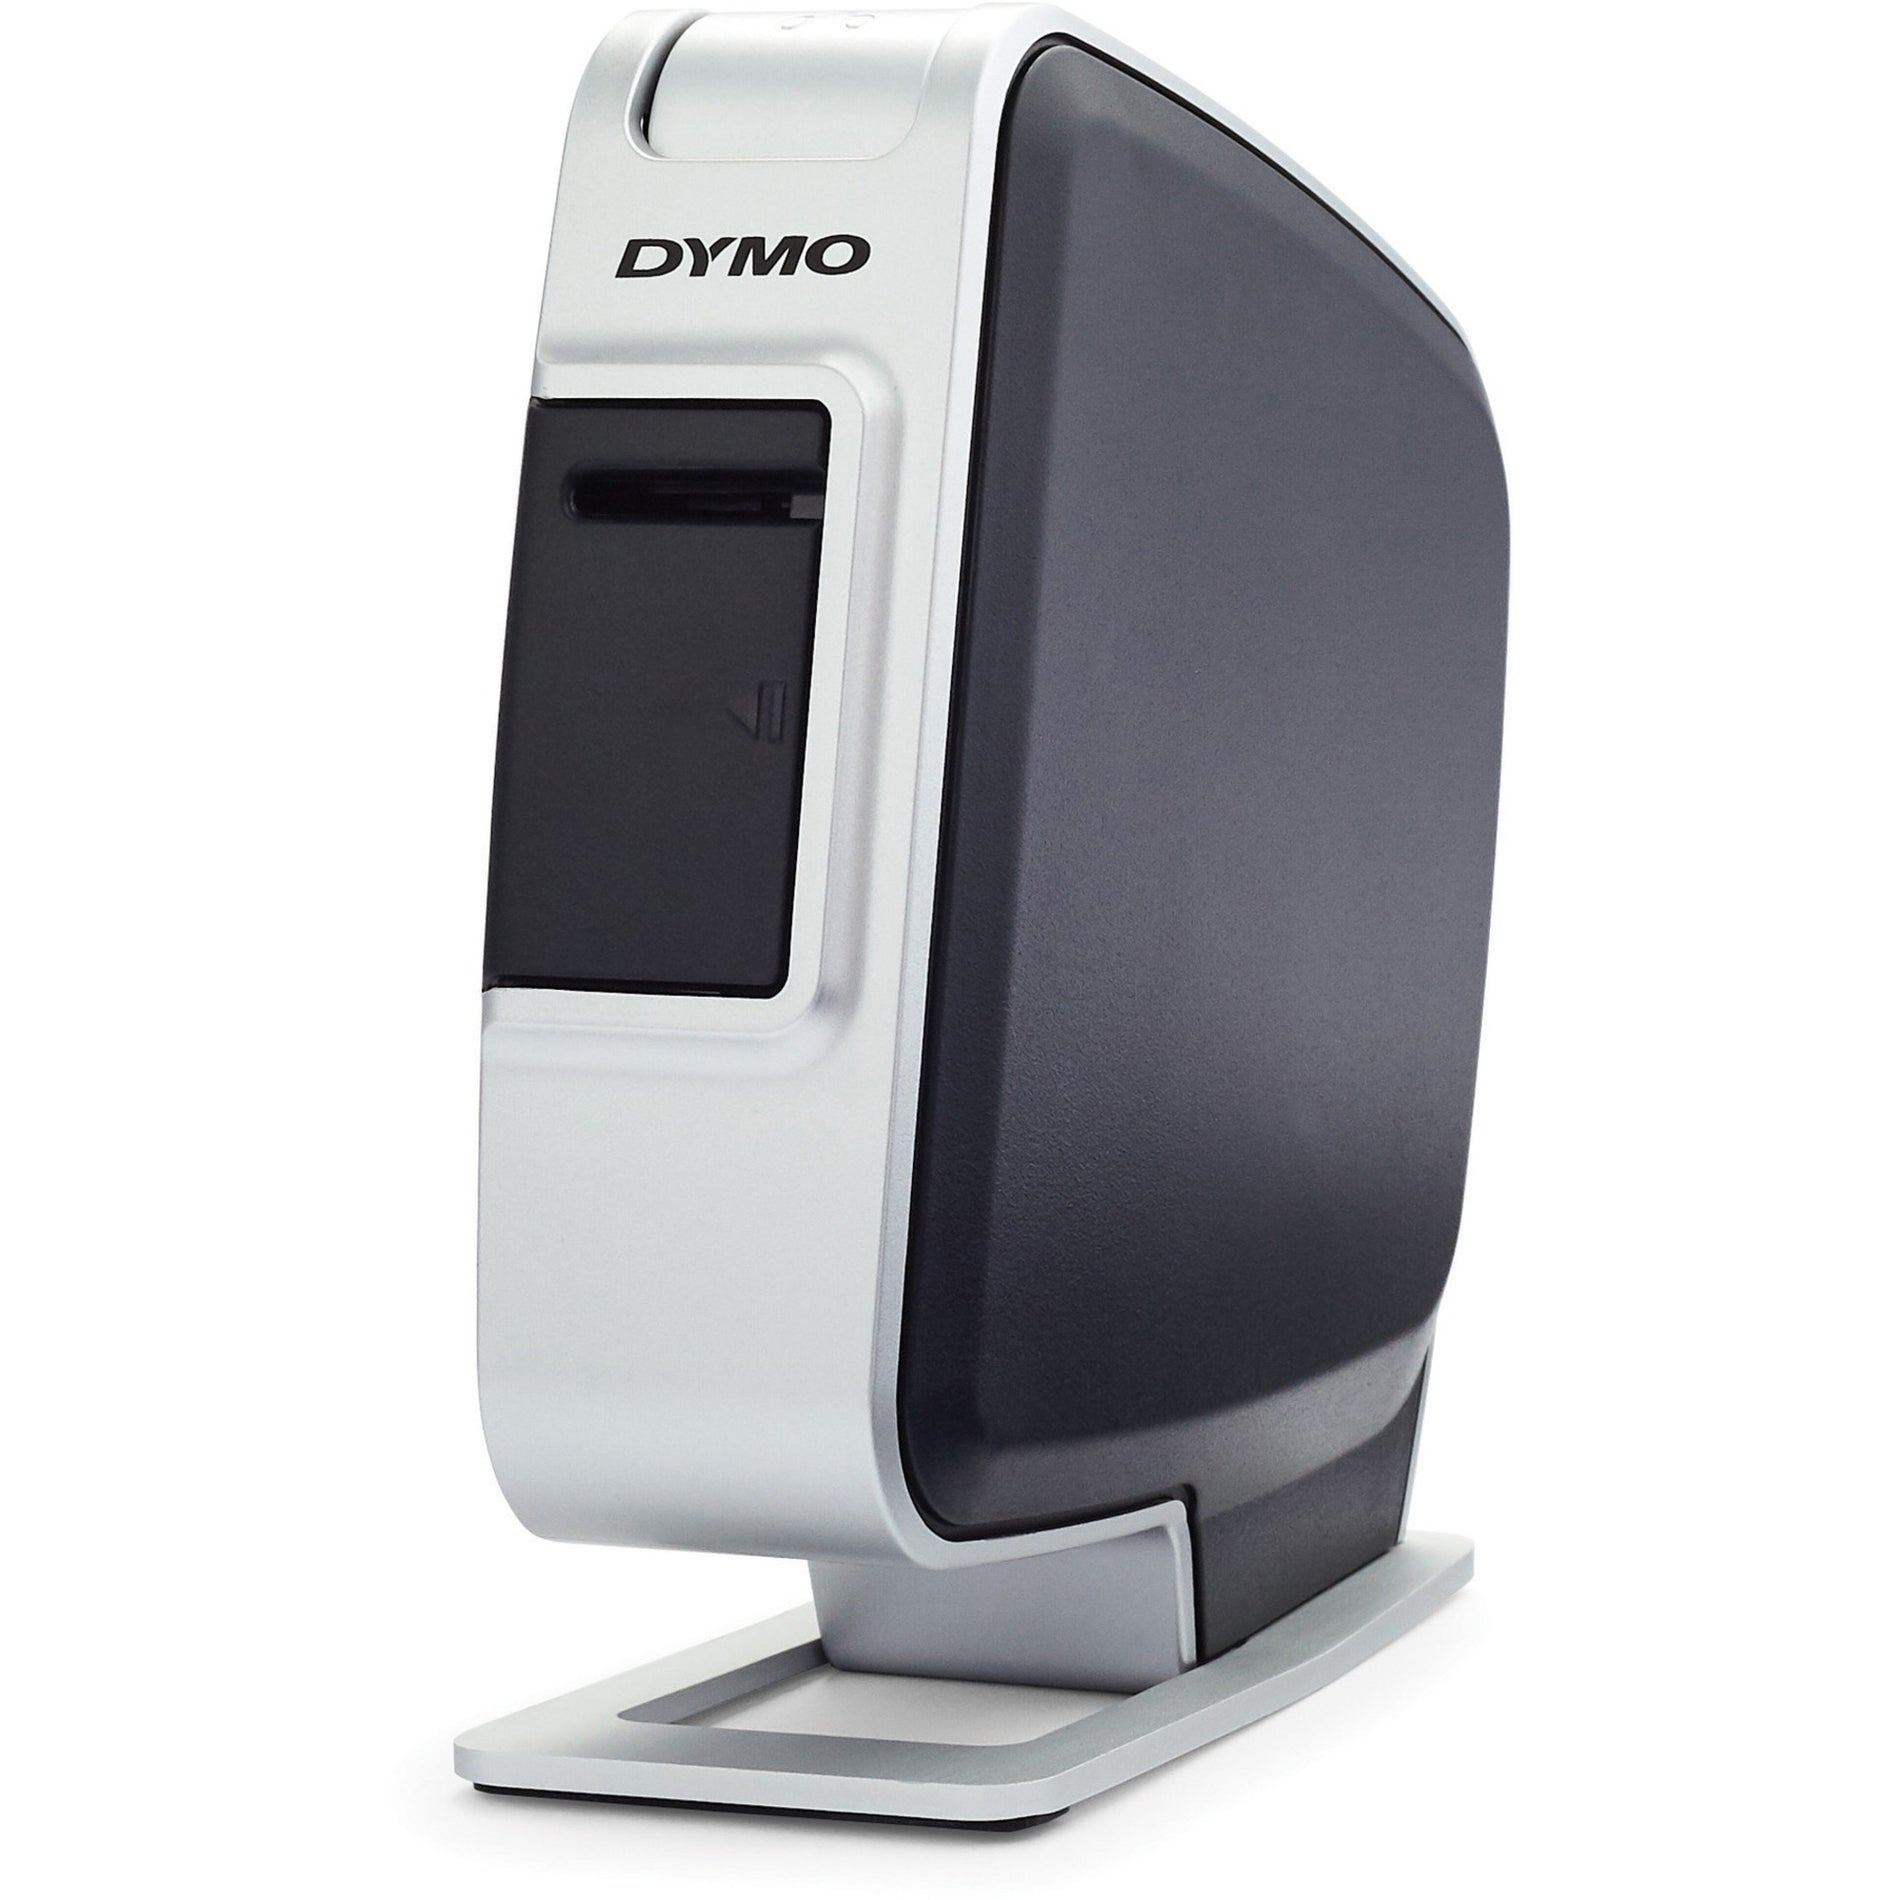 Dymo 1768960 LabelManager Plug-and-Play Labelmaker, 22.7pt, 2-1/2"x5-1/2"x5-3/10", Battery-Powered